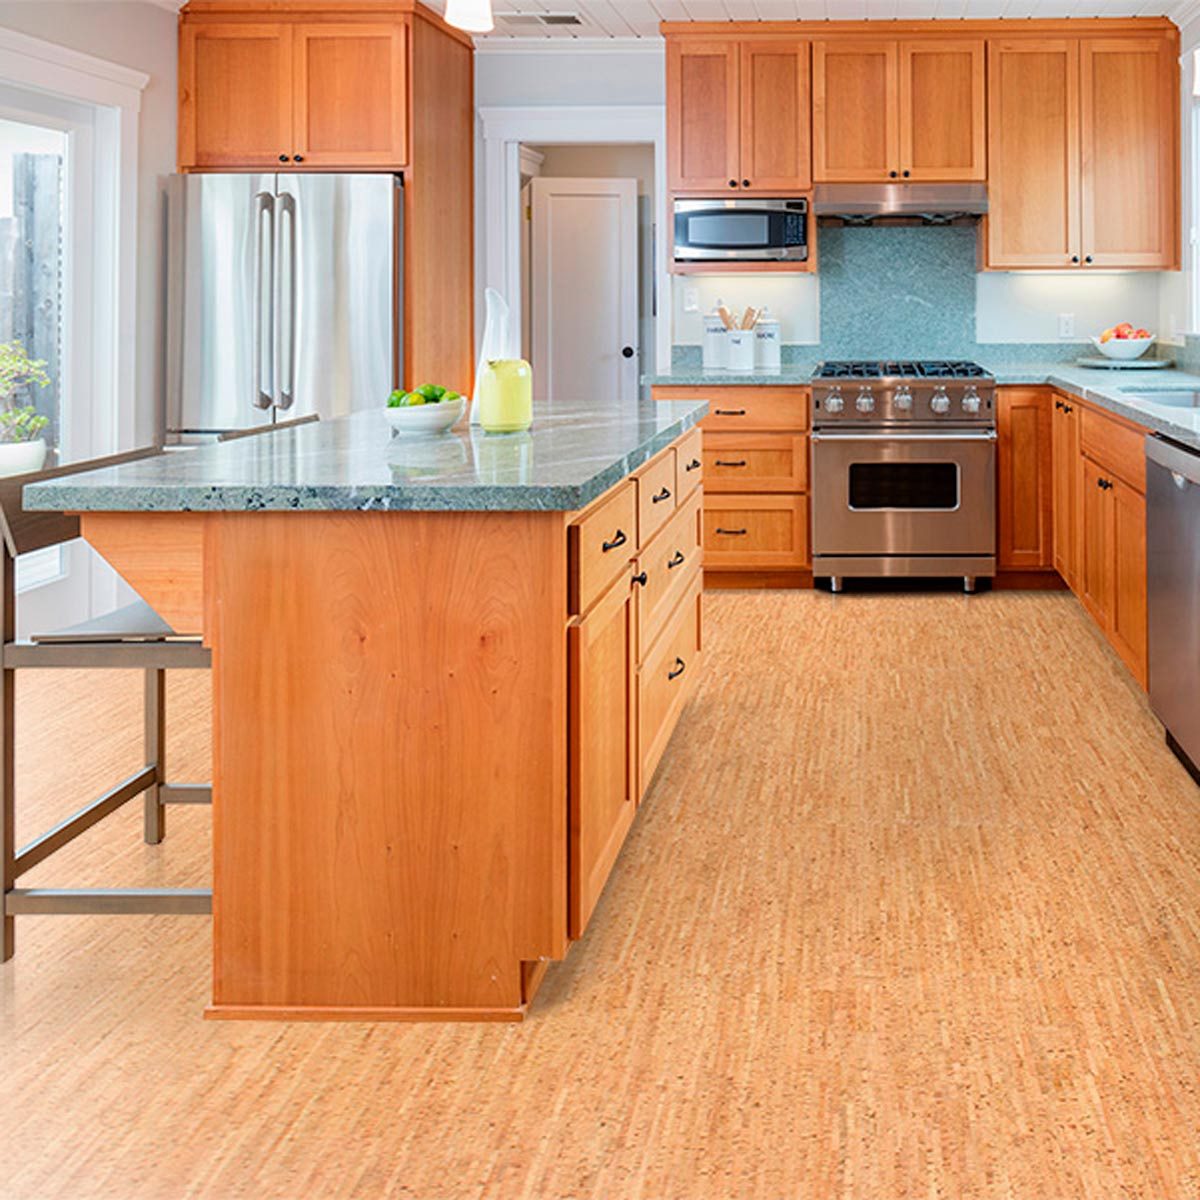 5 Kitchen Flooring Ideas That are Trending Right Now Family Handyman